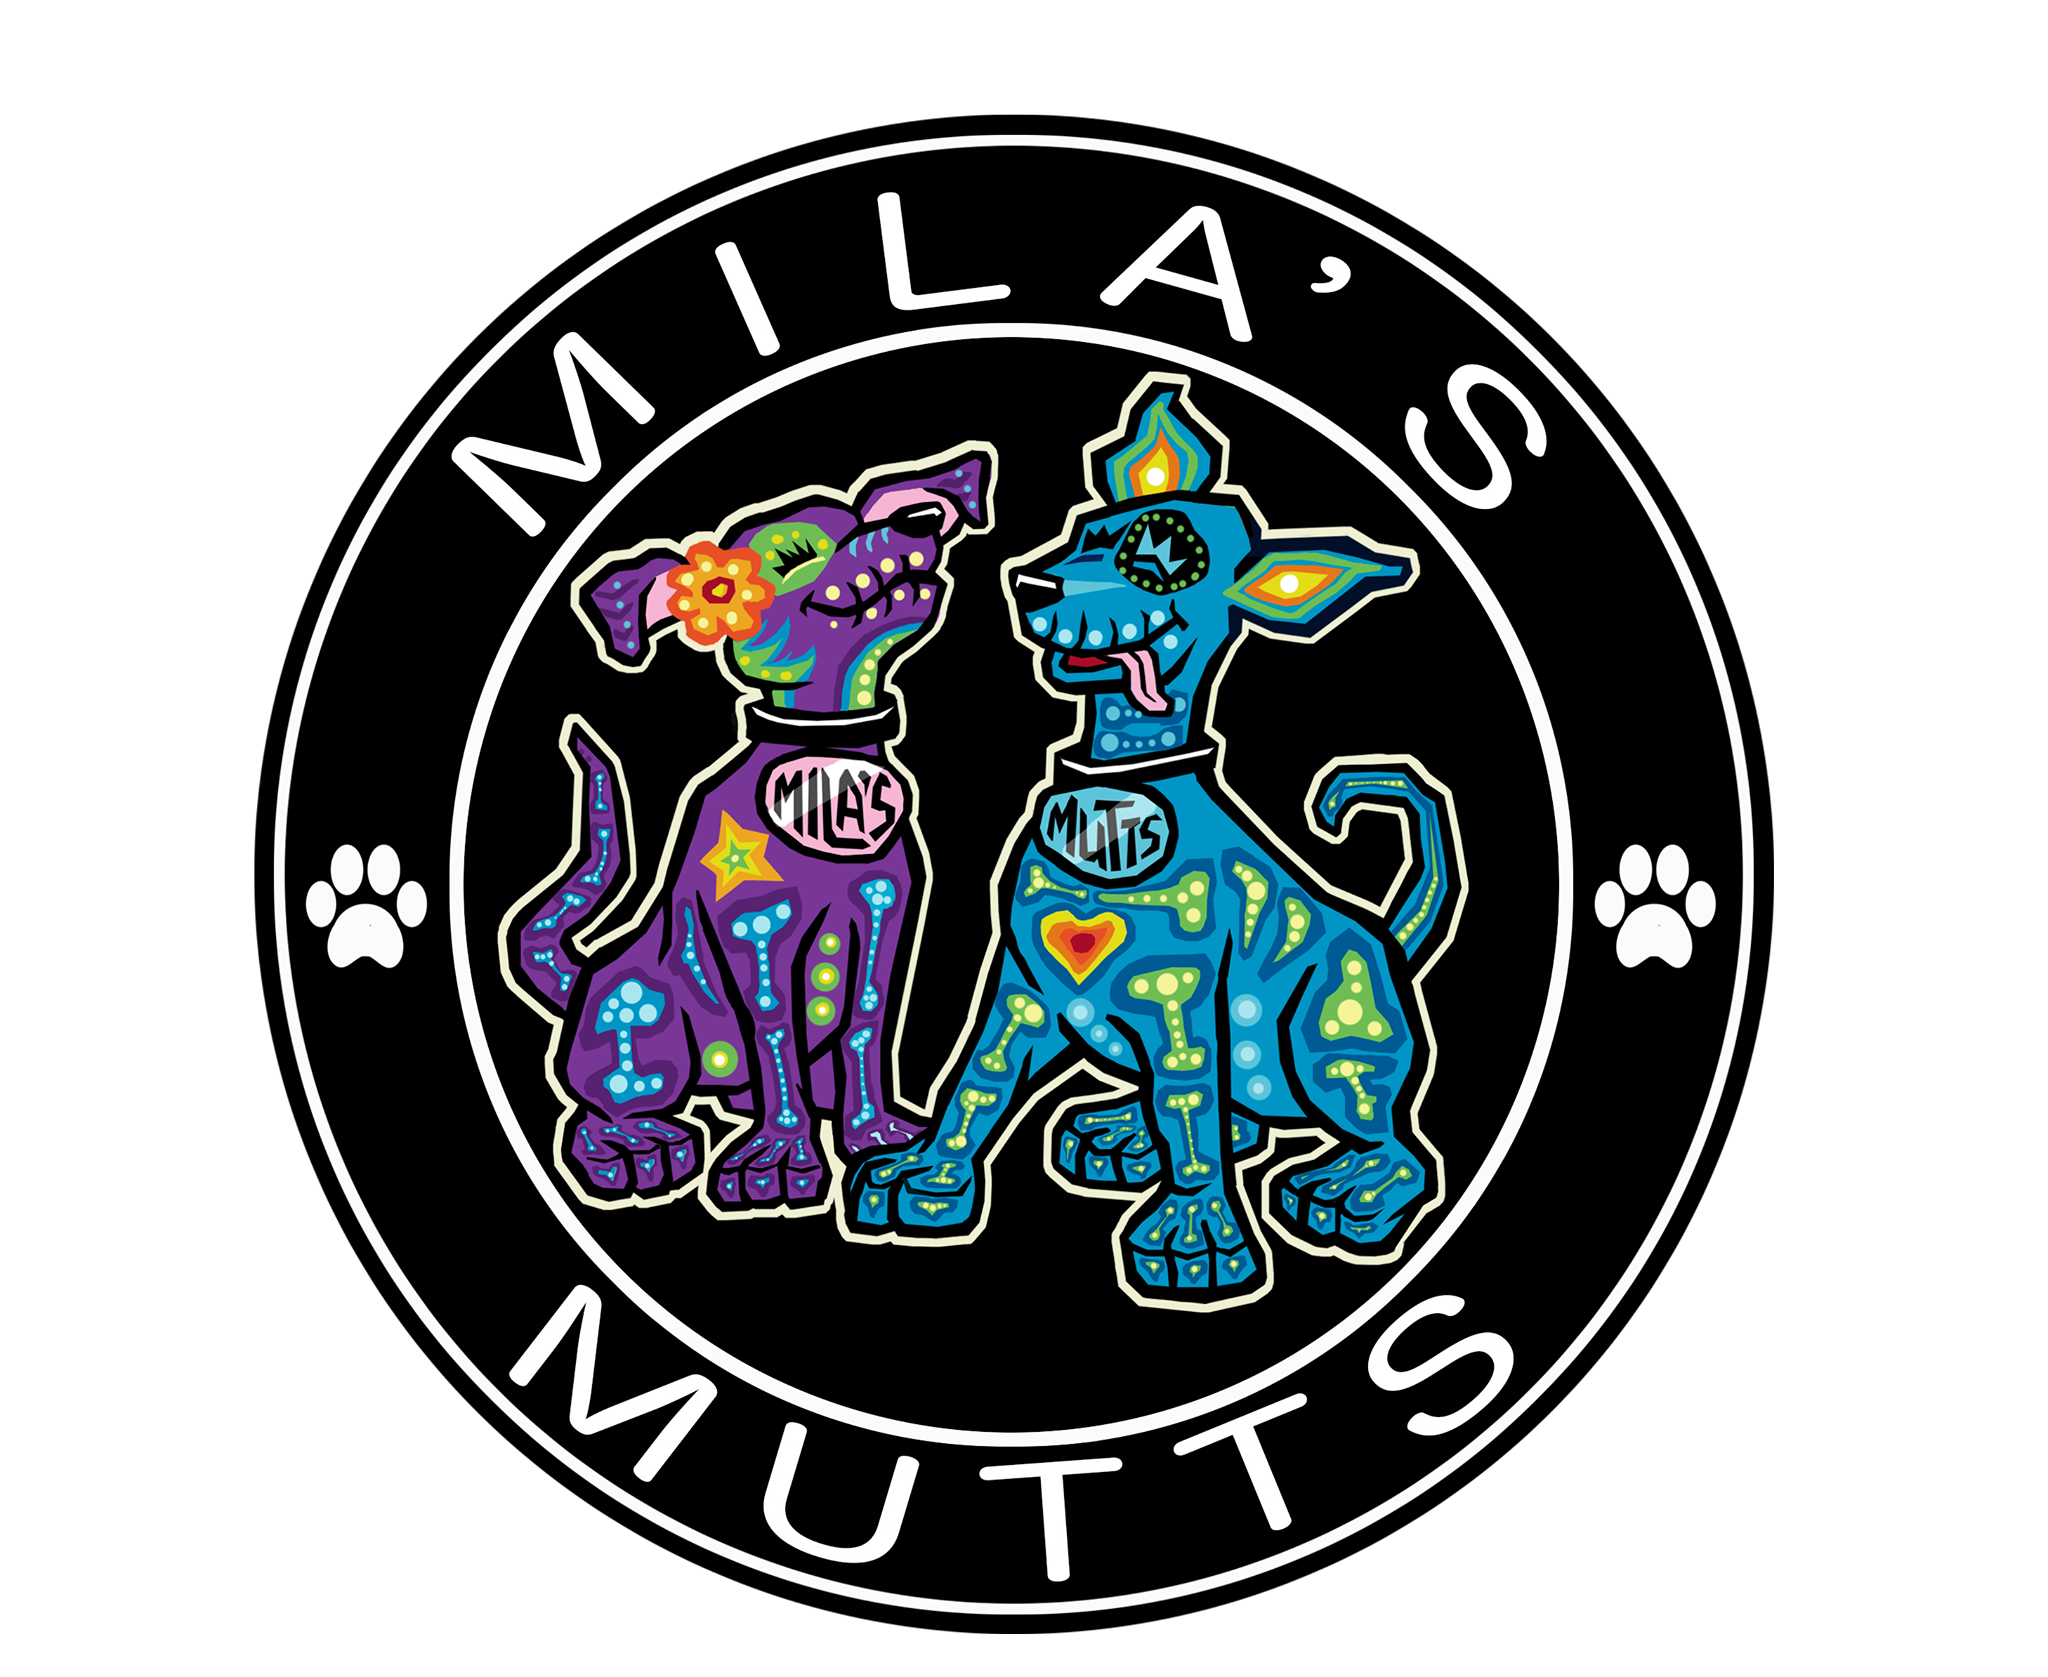 Mila's Mutts Dog Rescue